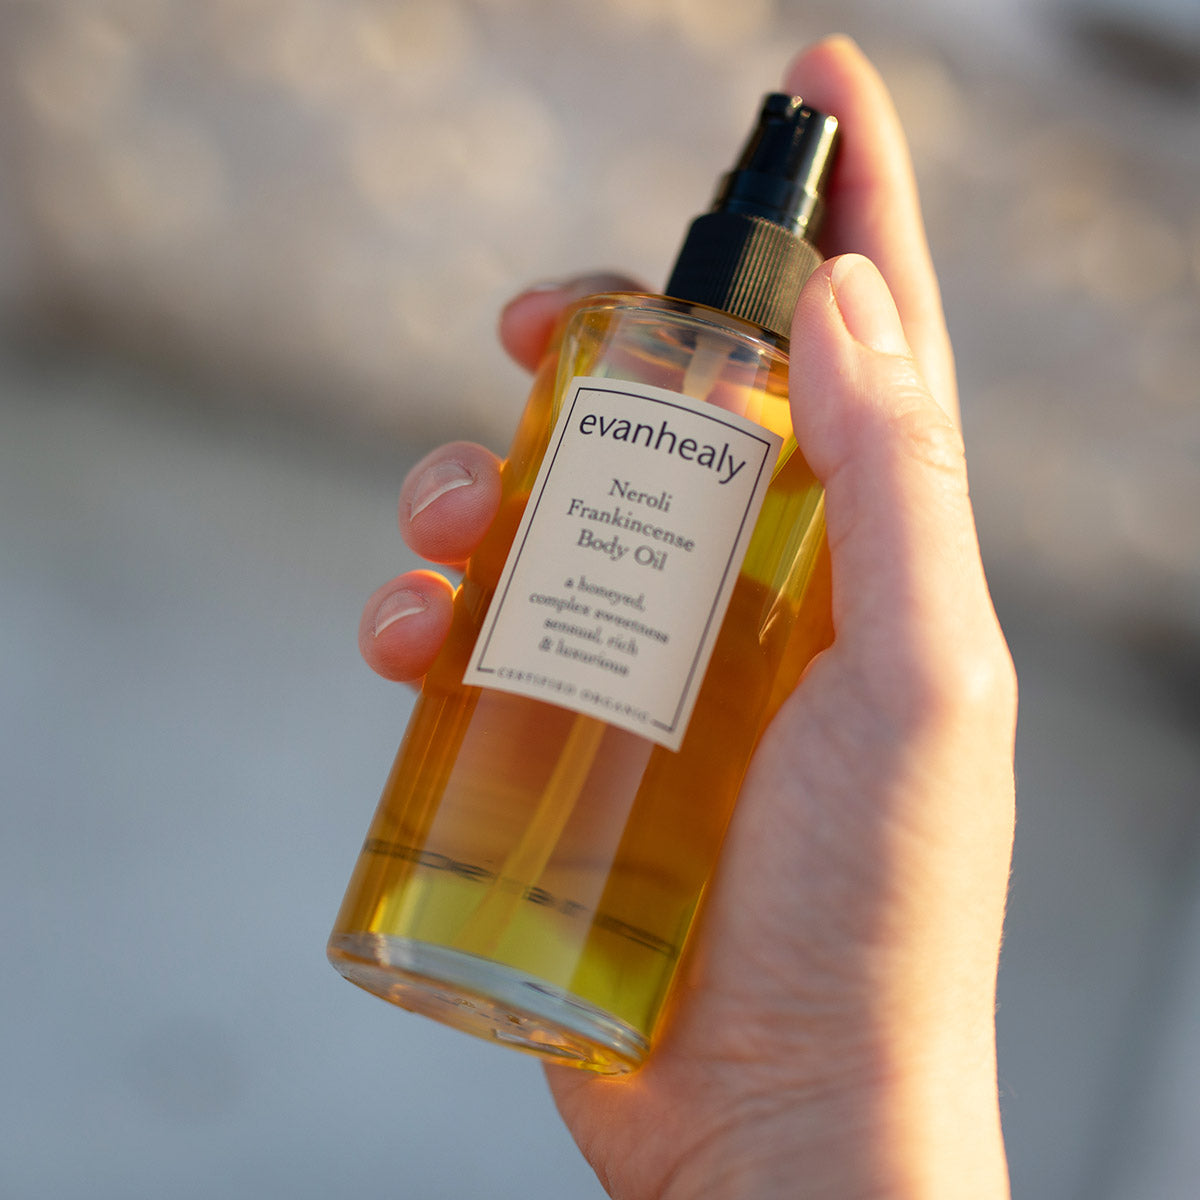 neroli frankincense size reference in hand of model